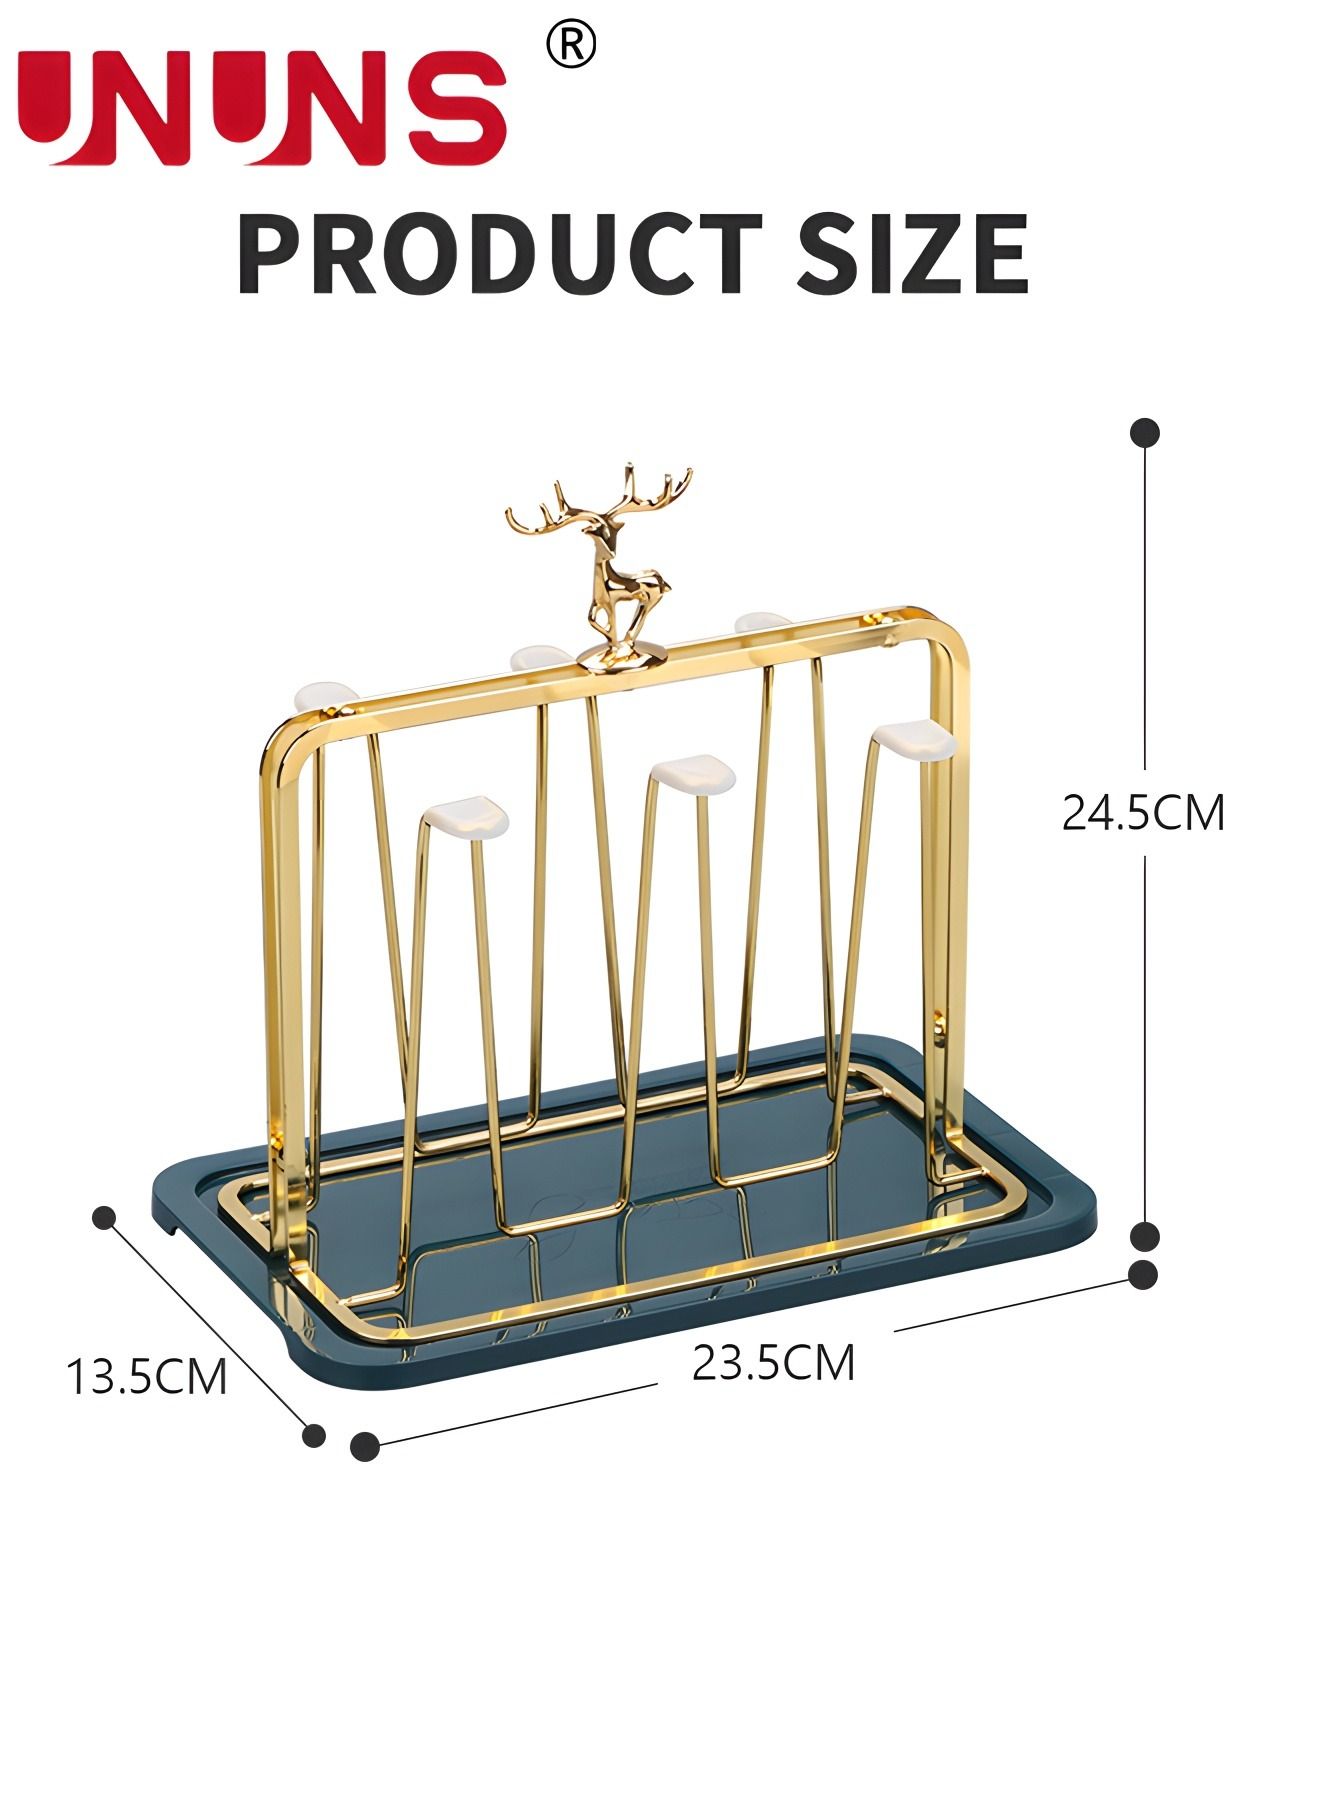 Coffee Mug Holder,Deer Shaped Cup Drying Rack With Detachable Drain Tray,Bottle Drying Rack Stand With 6 Hooks And Silicone Holder Pads,Mug Organizer 